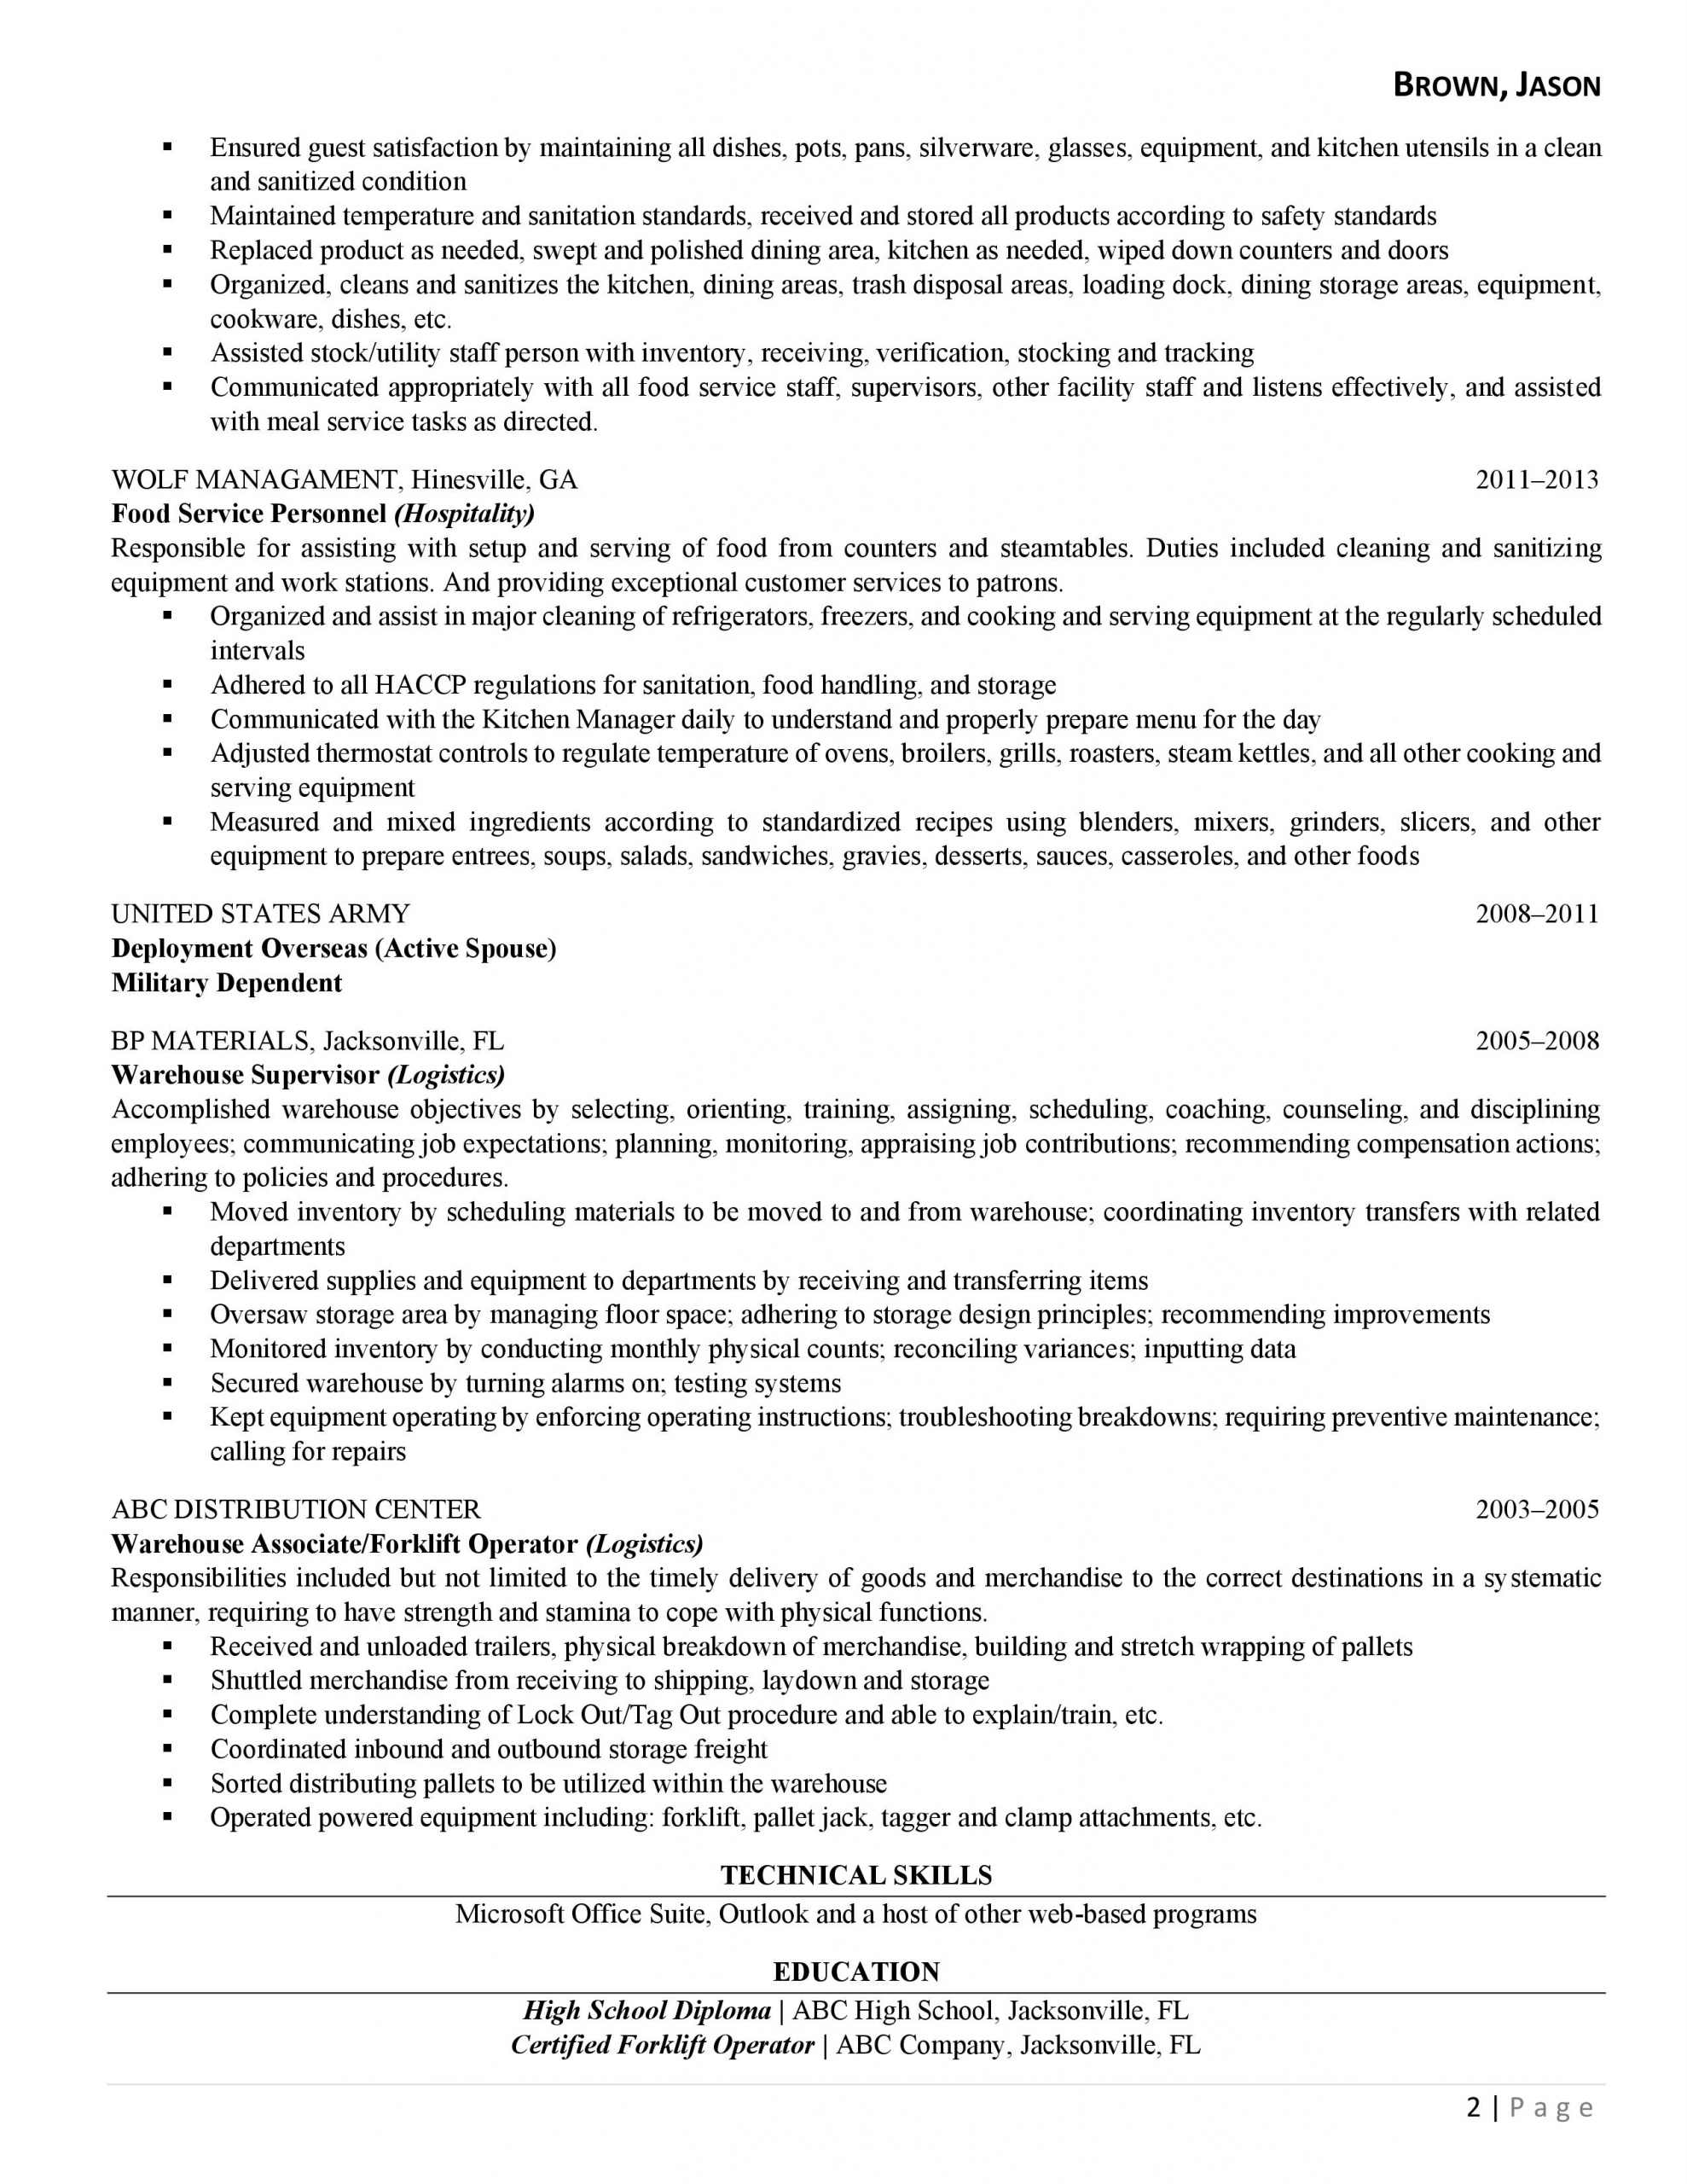 How to Write a Narrative Resume for Your Advanced Career